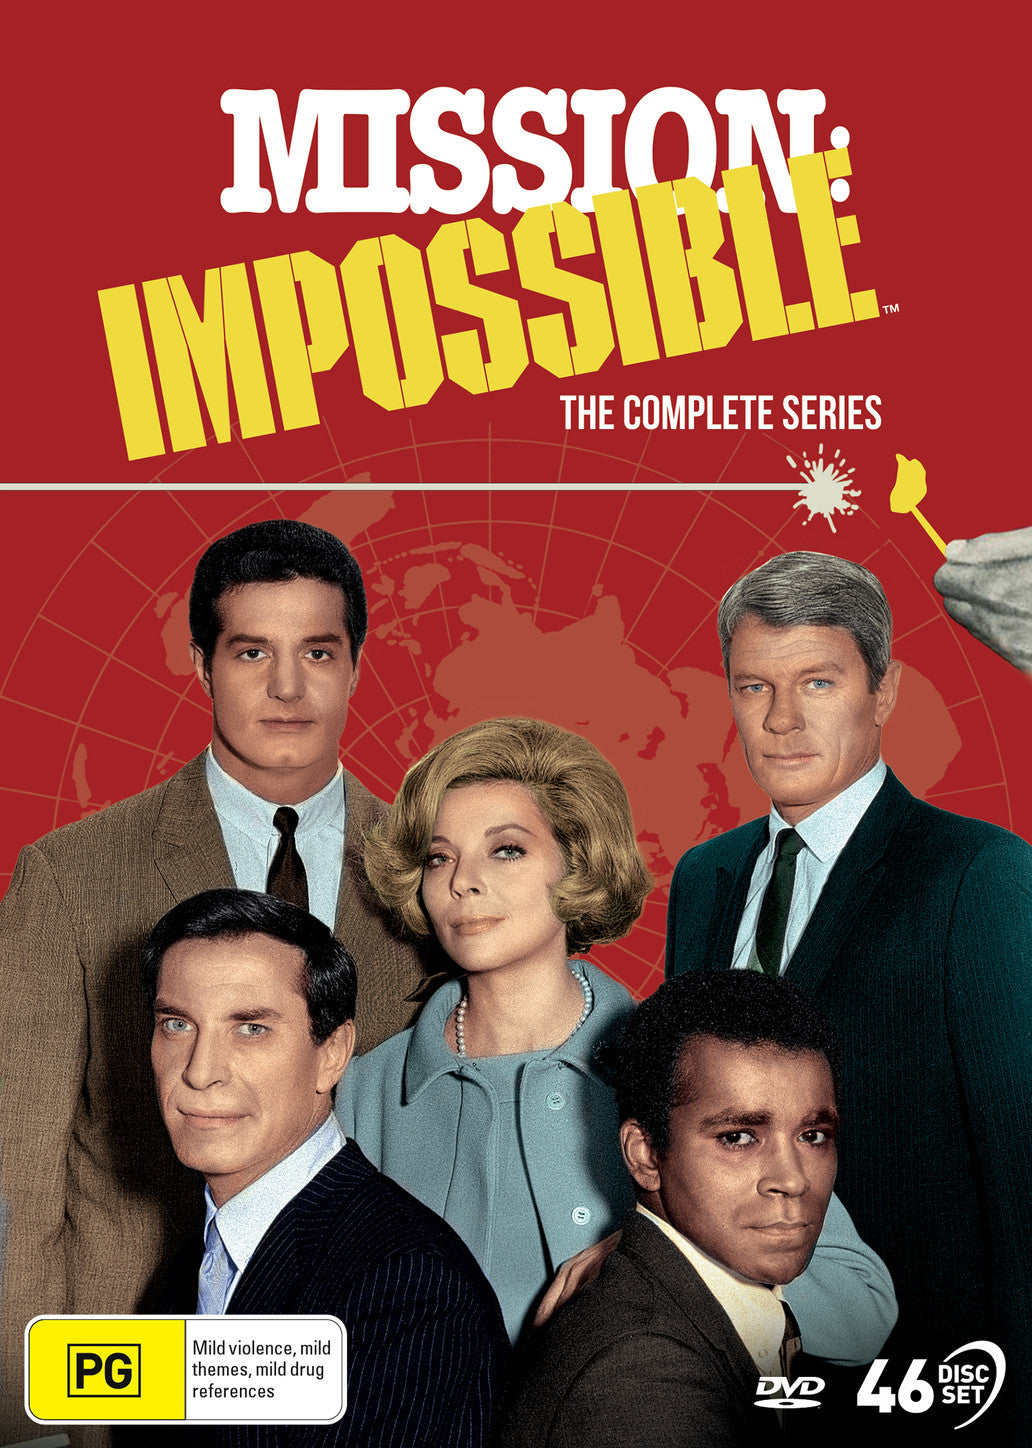 MISSION: IMPOSSIBLE: THE COMPLETE SERIES (1966 - 73)